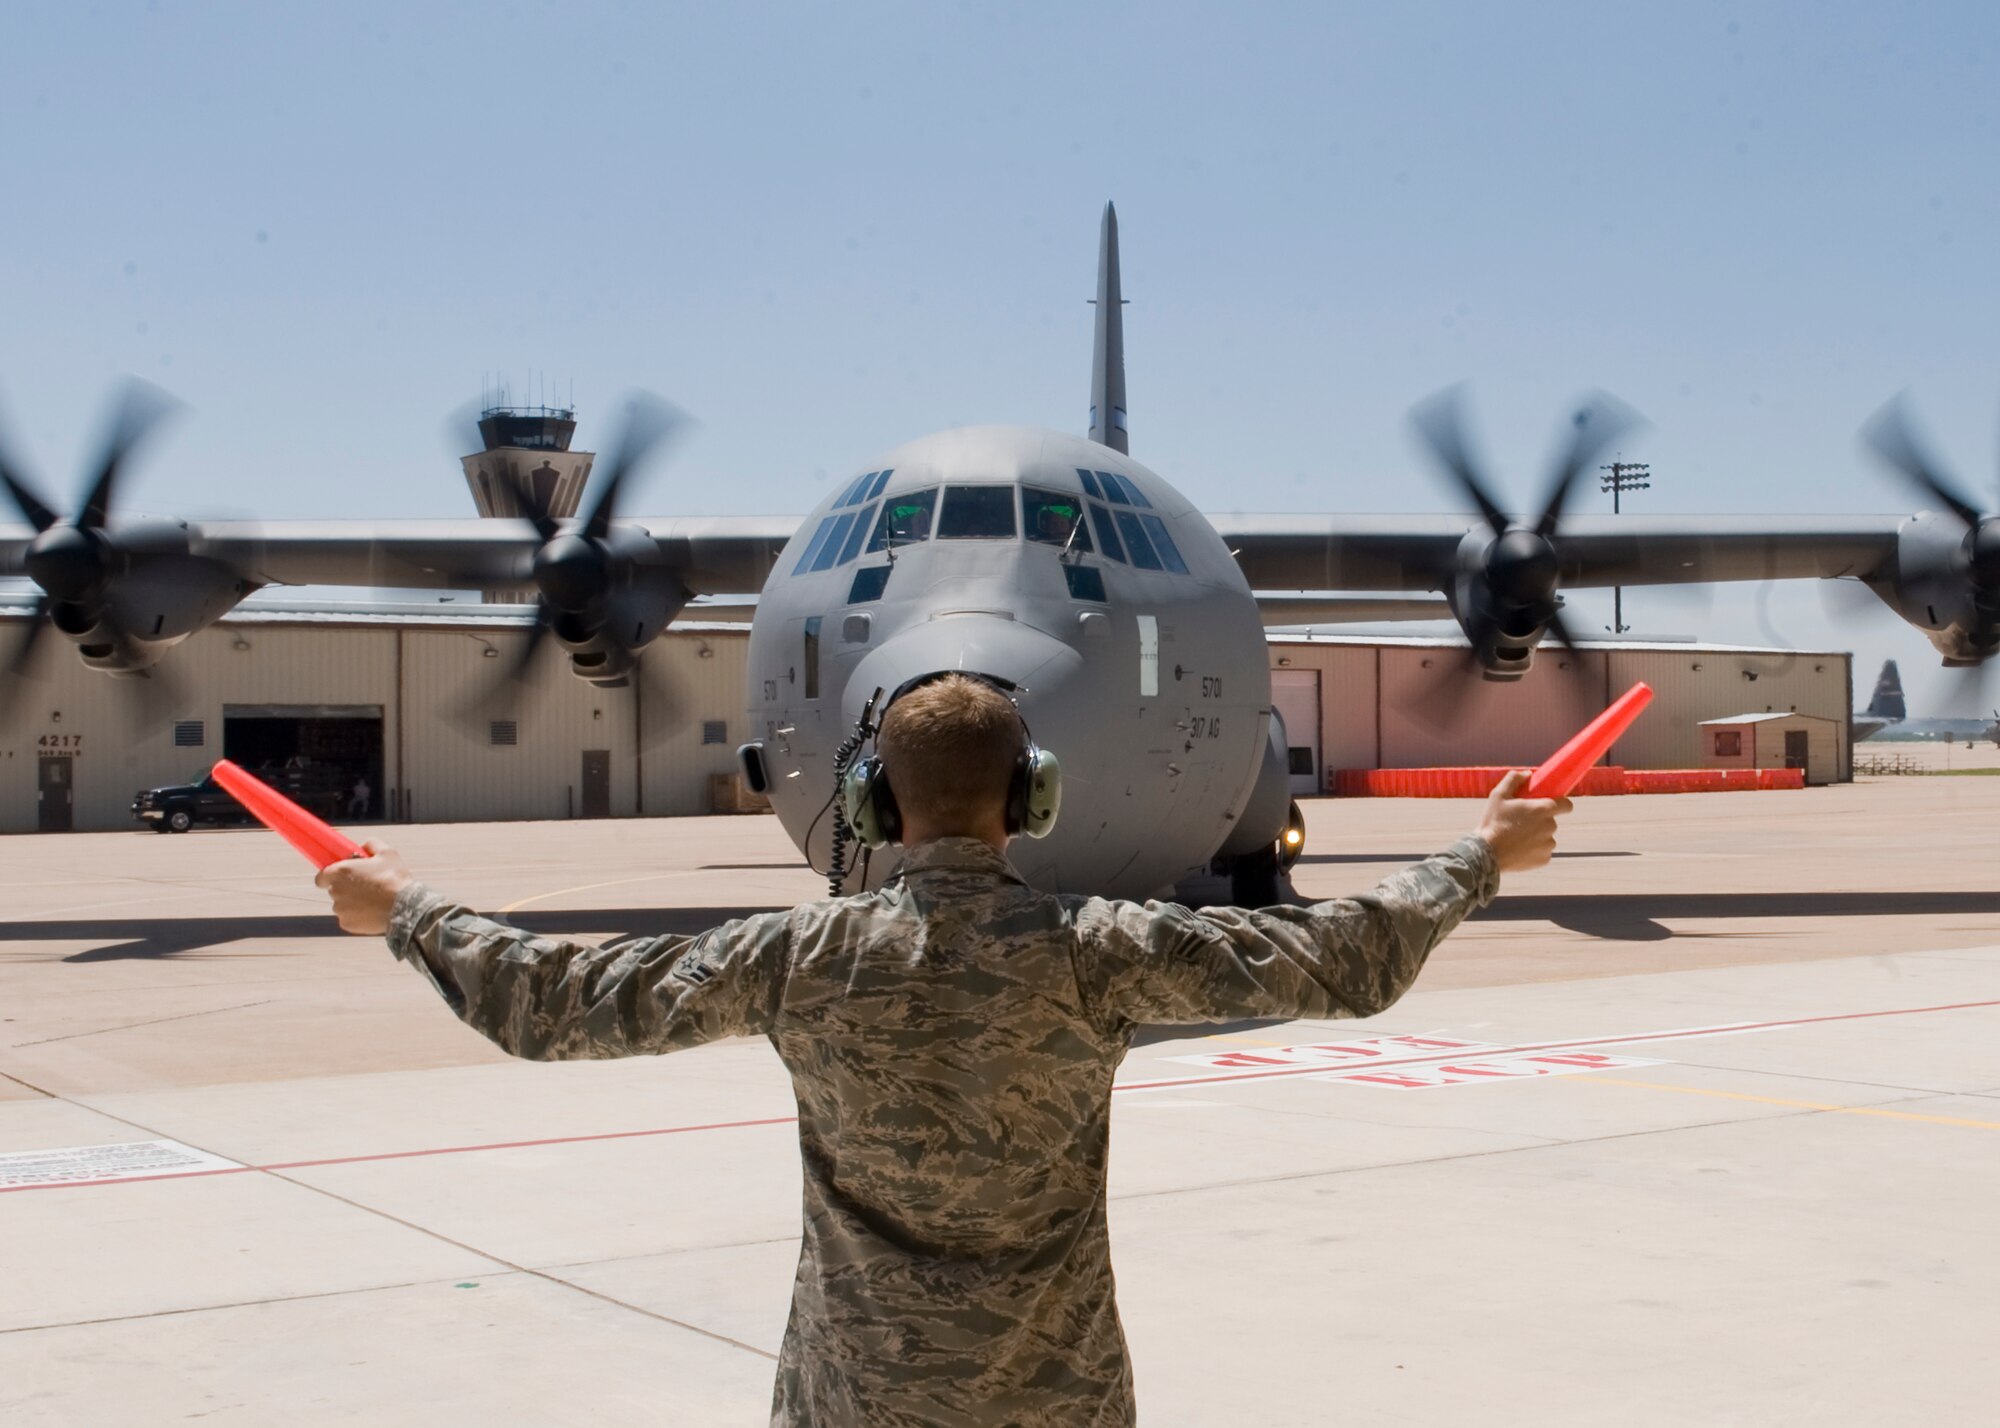 U.S. Air Force Airman 1st Class David Howard, 317th Aircraft Maintenance Squadron, marshals the newest C-130J Super Hercules Aug. 29, 2012, at Dyess Air Force Base, Texas. The aircraft, delivered personally by U.S. Air Force Gen. William Fraser III, U.S. Transportation Command commander, is the 22nd of 28 to be delivered to Dyess by 2013, replacing the current legacy fleet of C-130 H-models. (U.S. Air Force photo by Airmen 1st Class Peter Thompson/ Released)